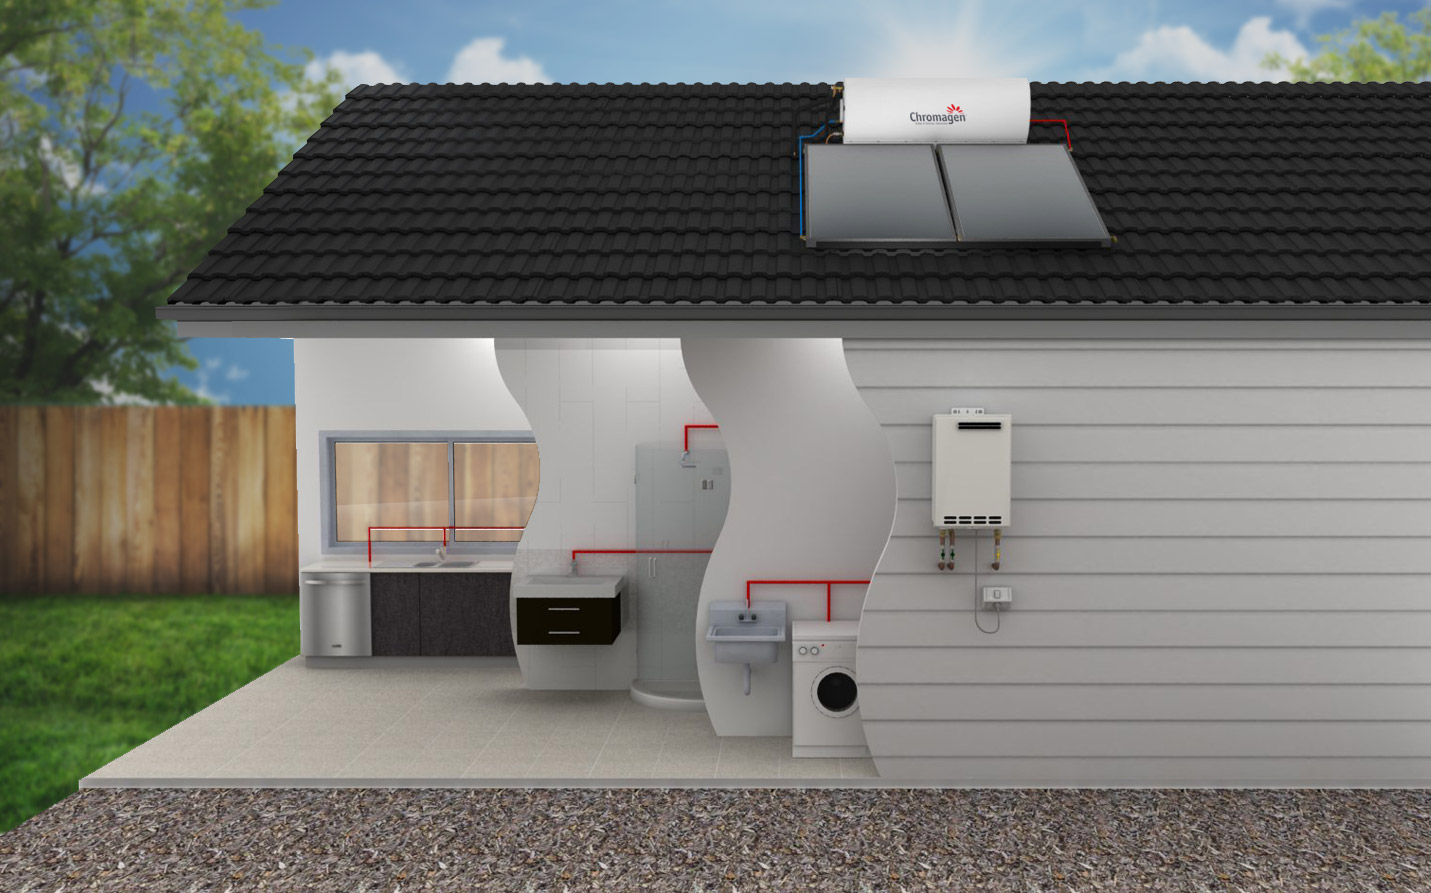 How the RoofLine solar hot water system works